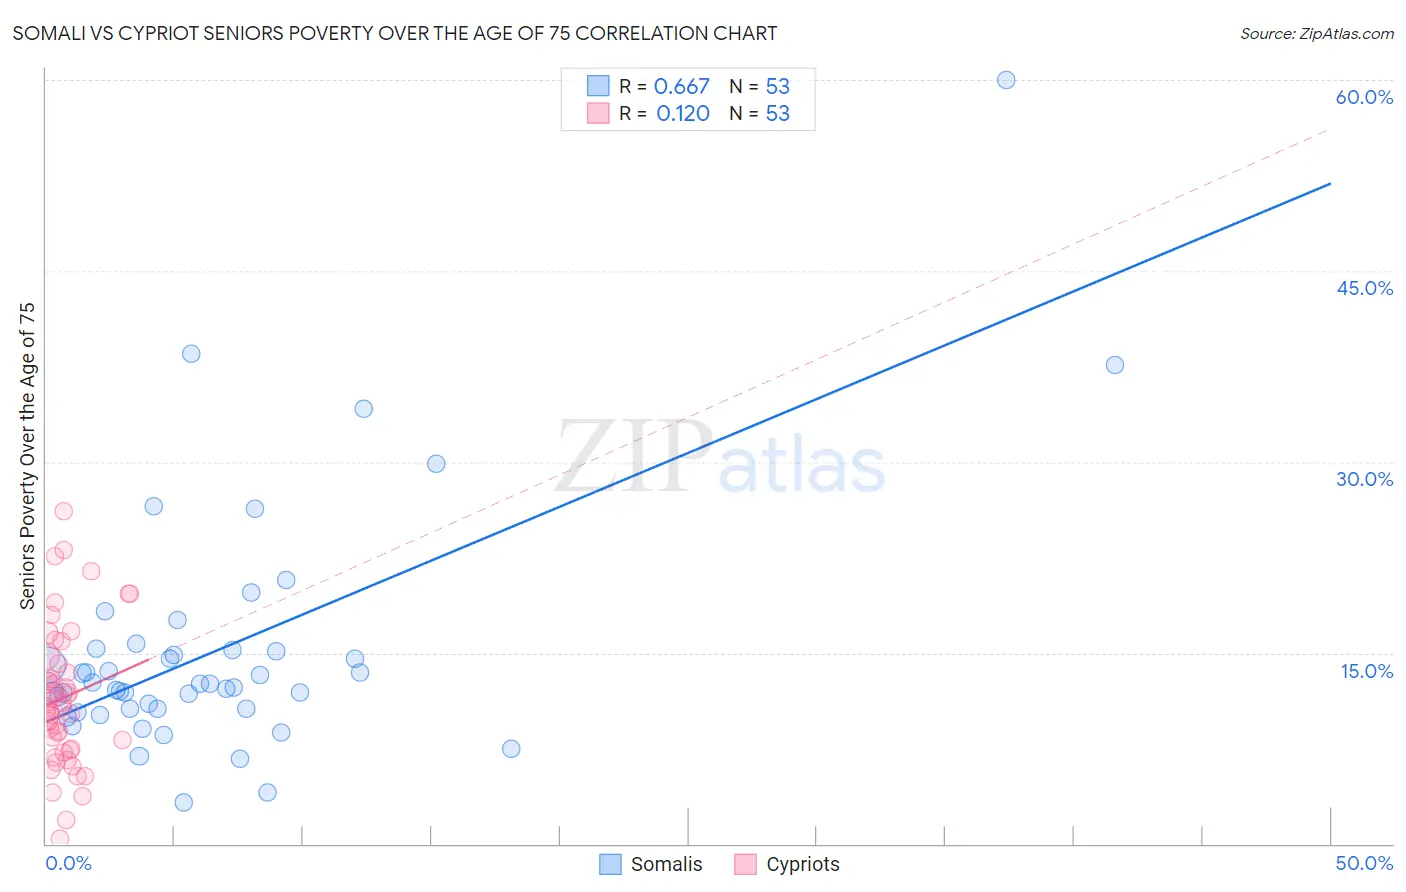 Somali vs Cypriot Seniors Poverty Over the Age of 75